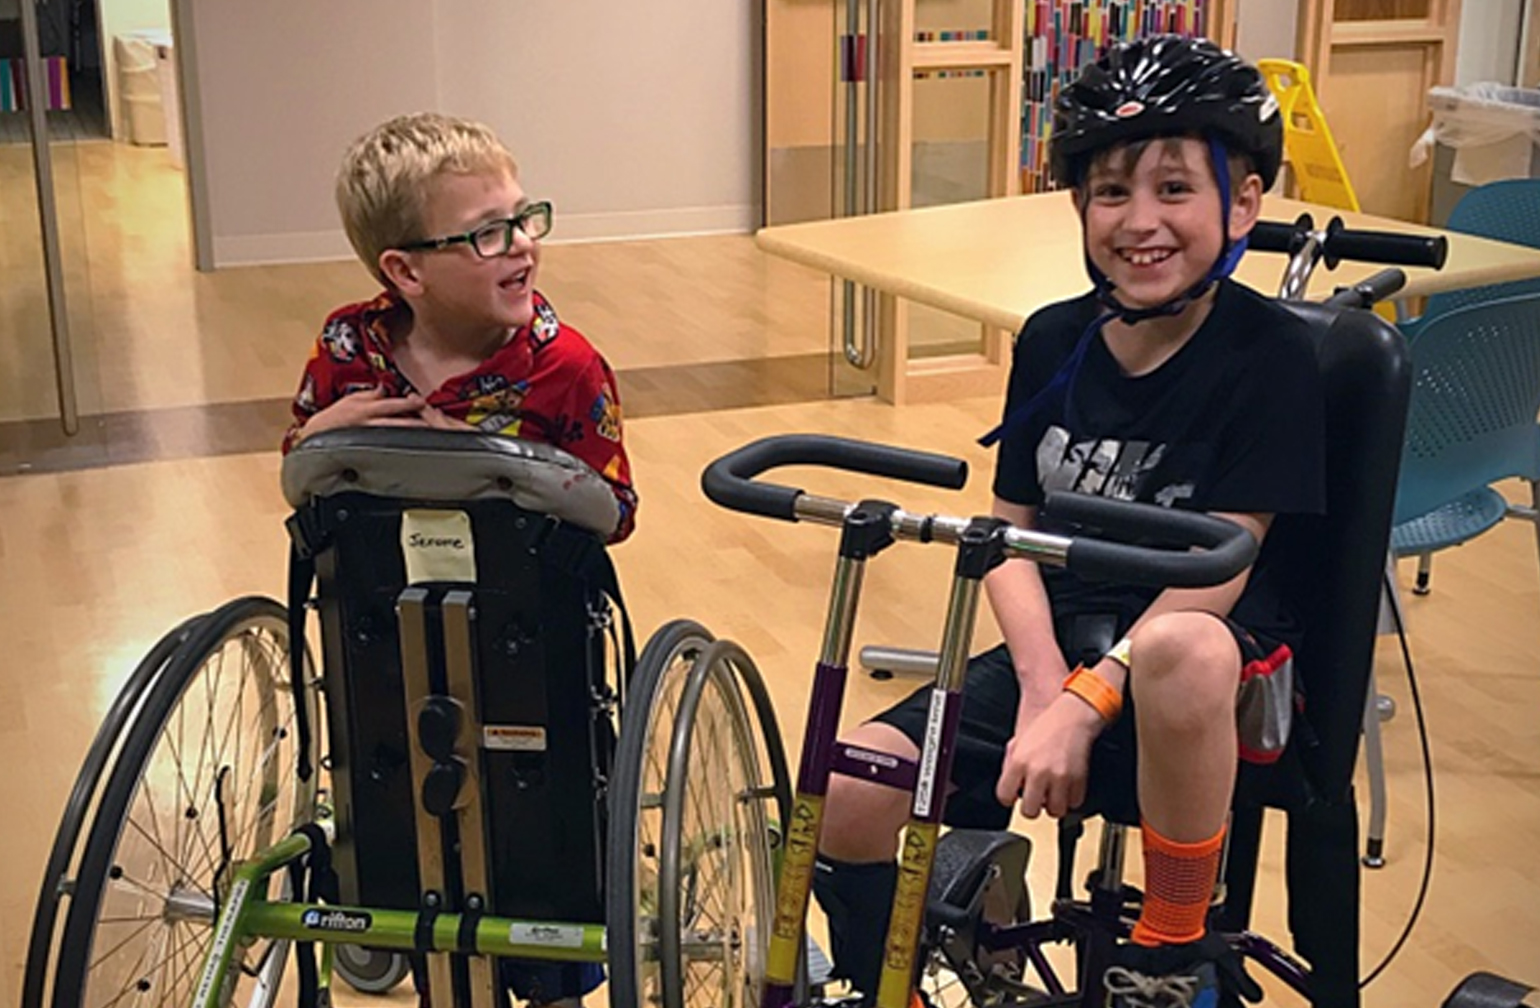 Trevor with a good friend in Gillette's inpatient rehab unit